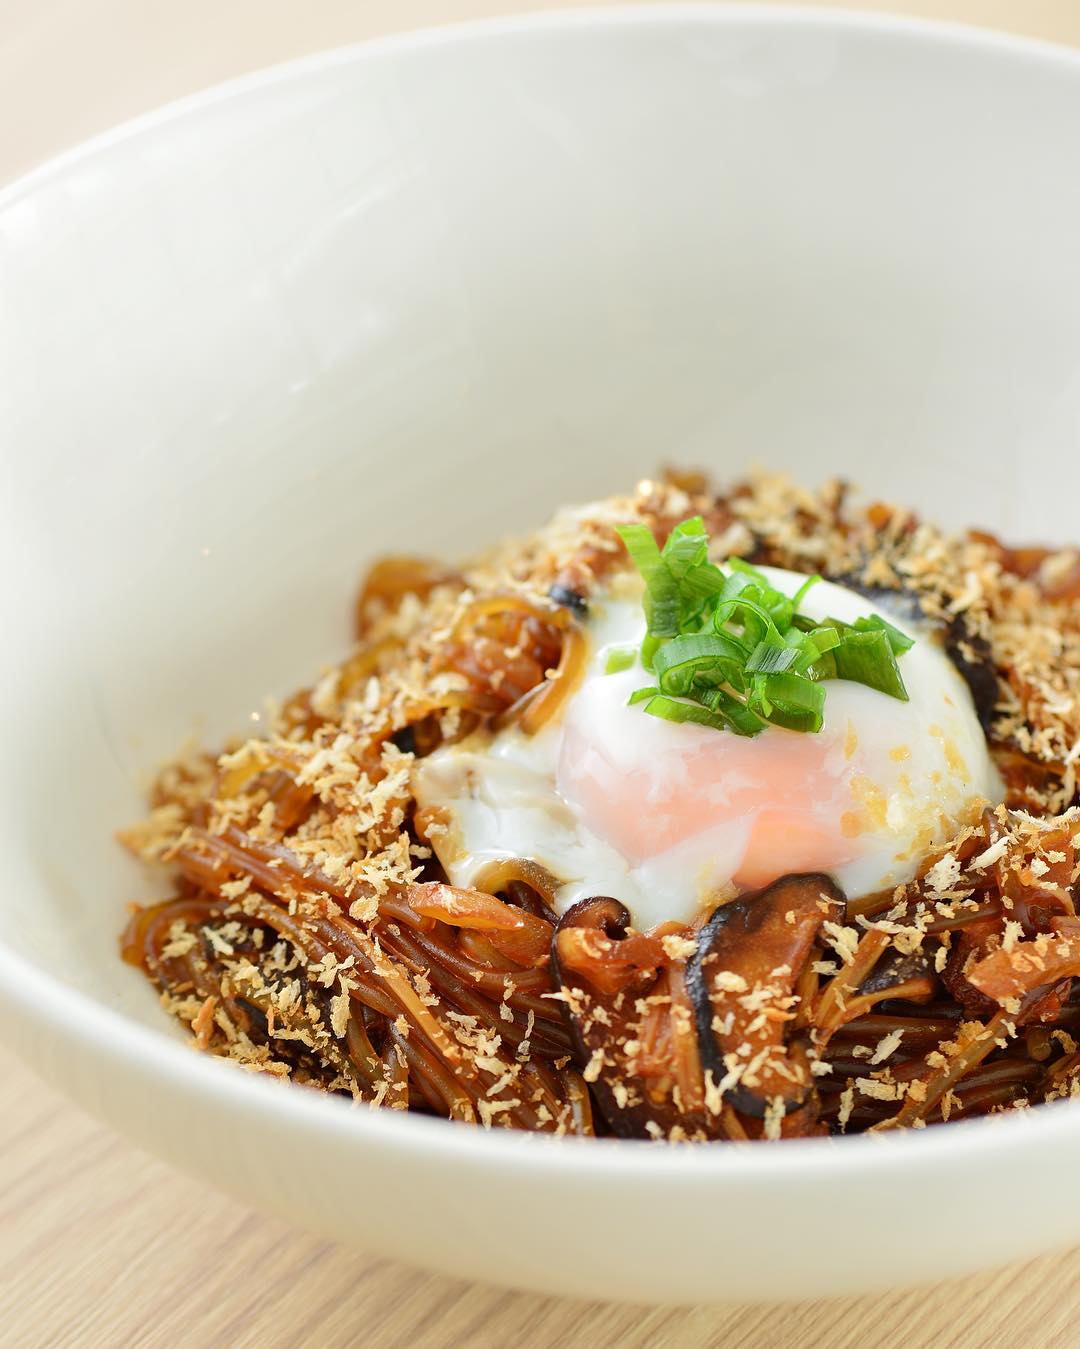 Kasa's sweet potato noodles topped with an Onsen egg